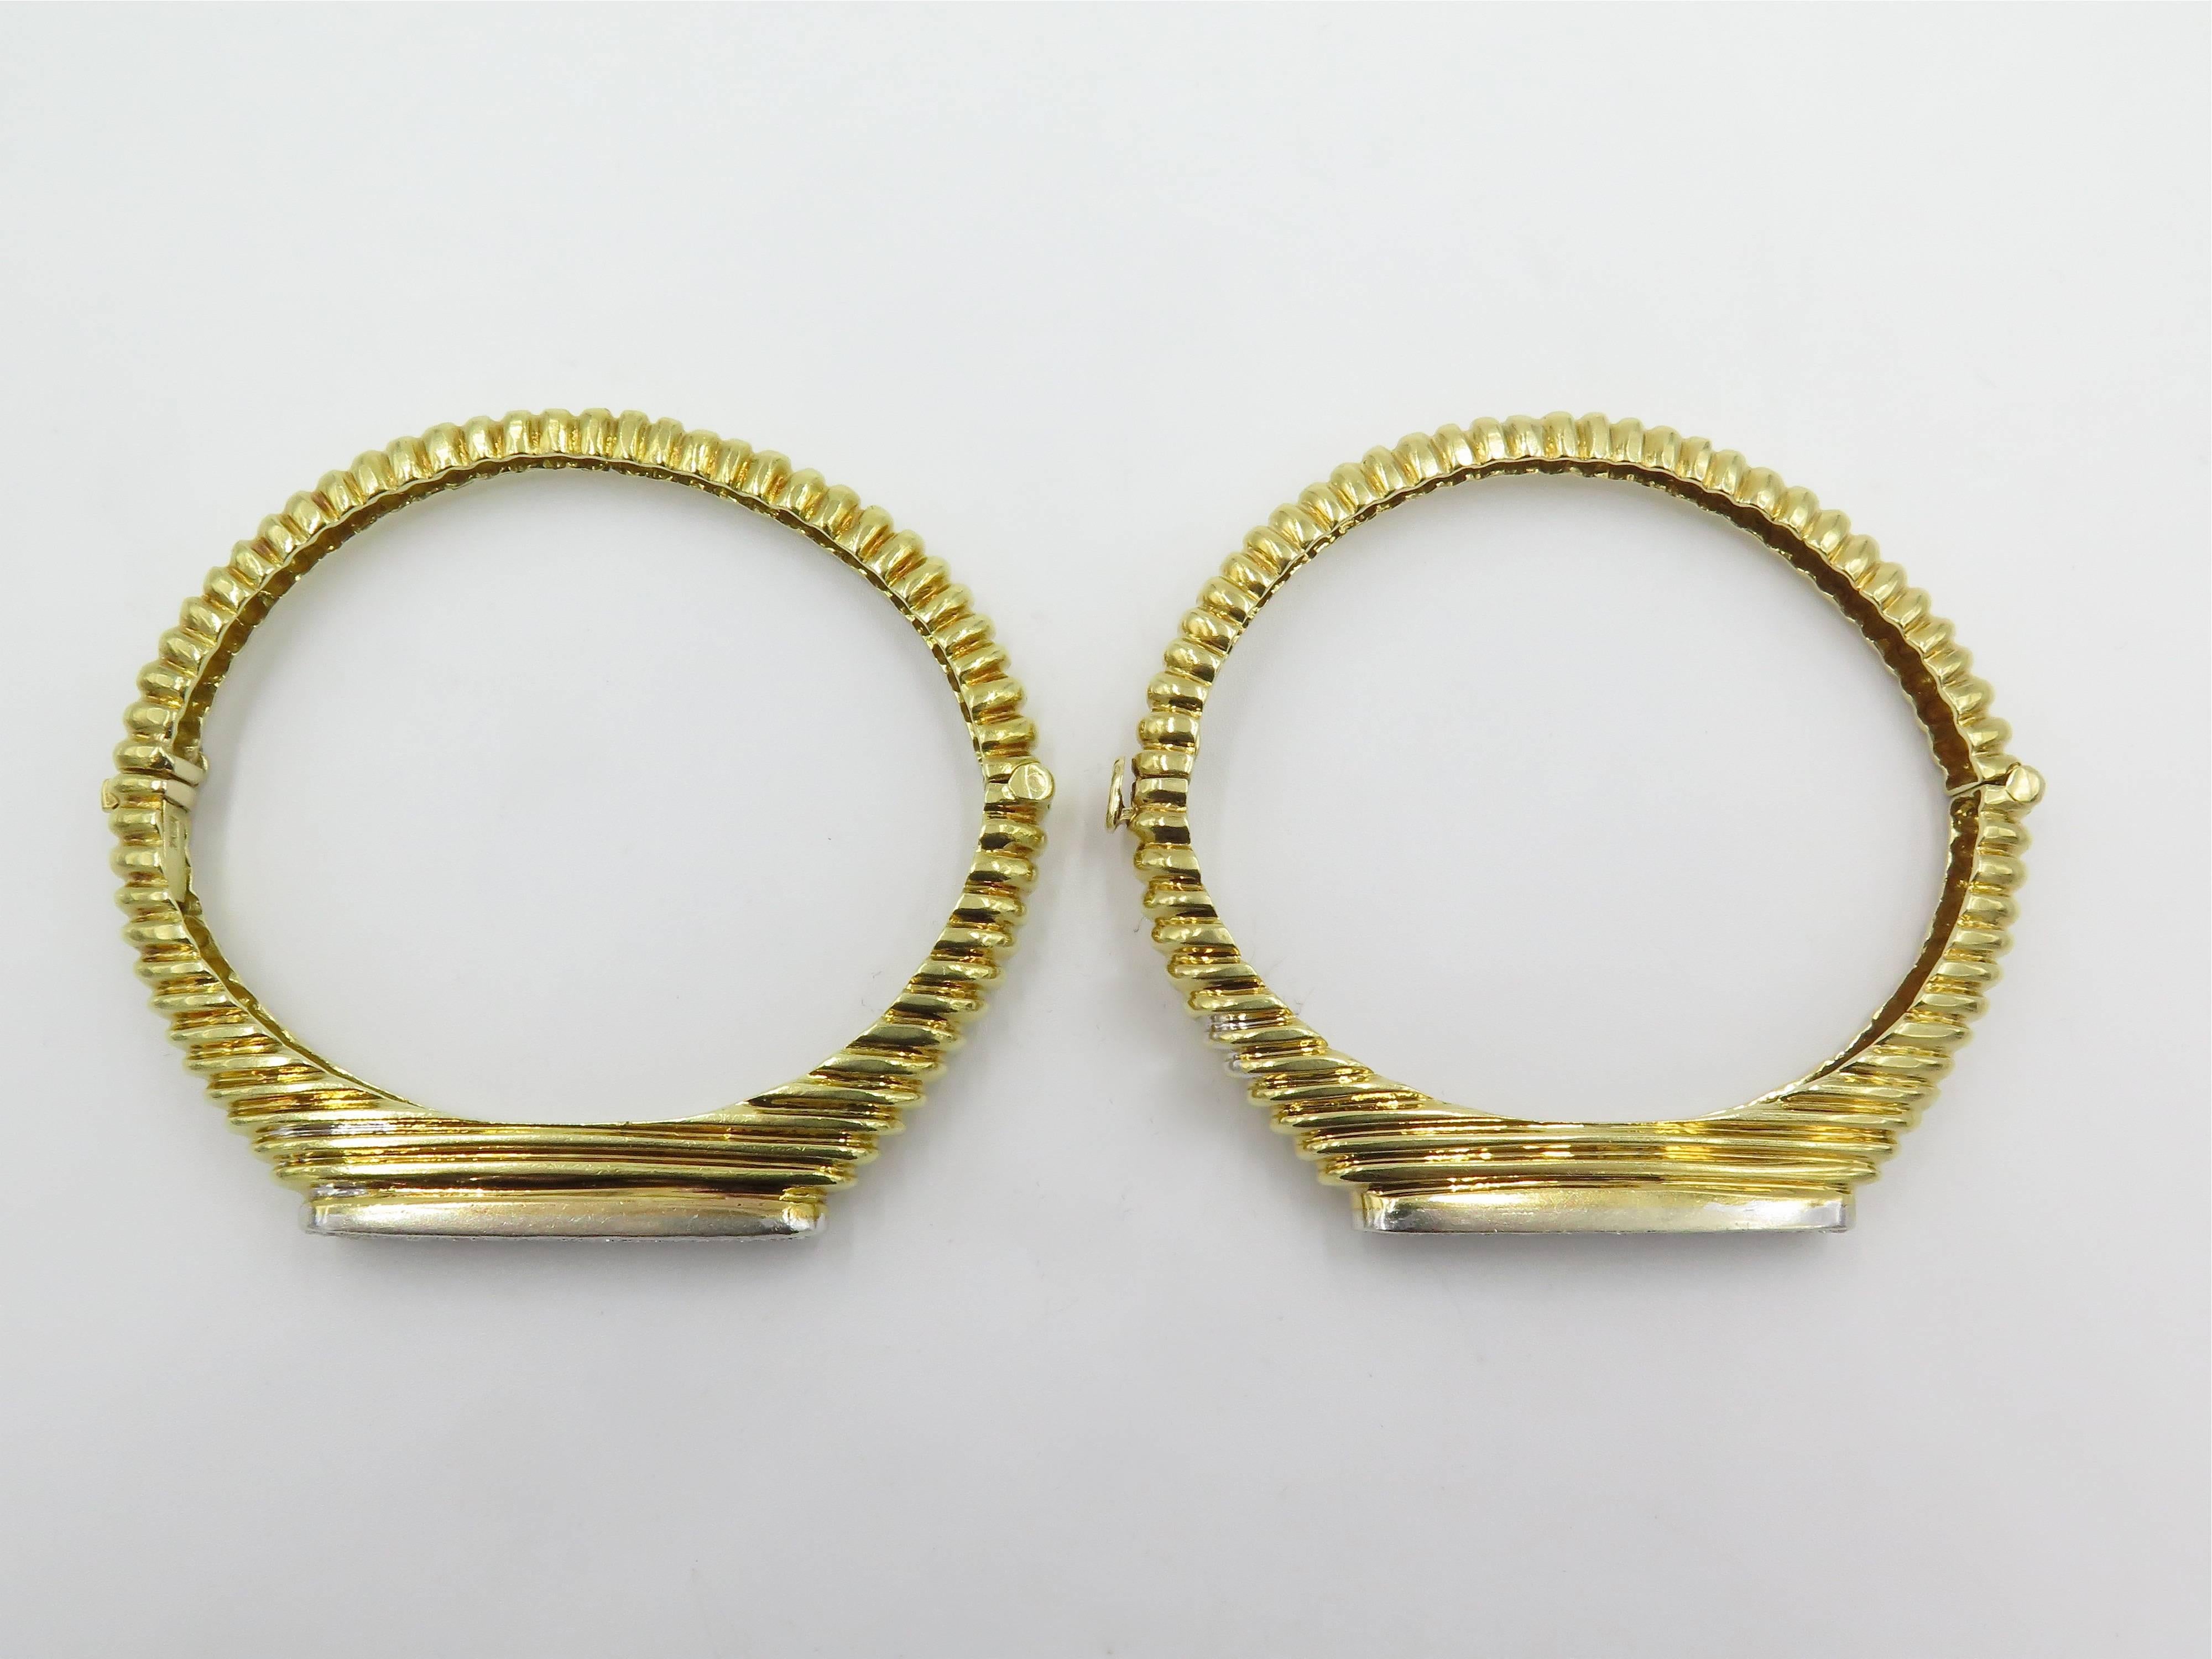 A pair of 18 karat yellow gold and diamond bracelets. Each designed as a fluted hinged cuff of tapered design, centering an oval pave set diamond plaque. Forty four (44) diamonds weigh approximately 2.20 carats total. Each has an inside measurement